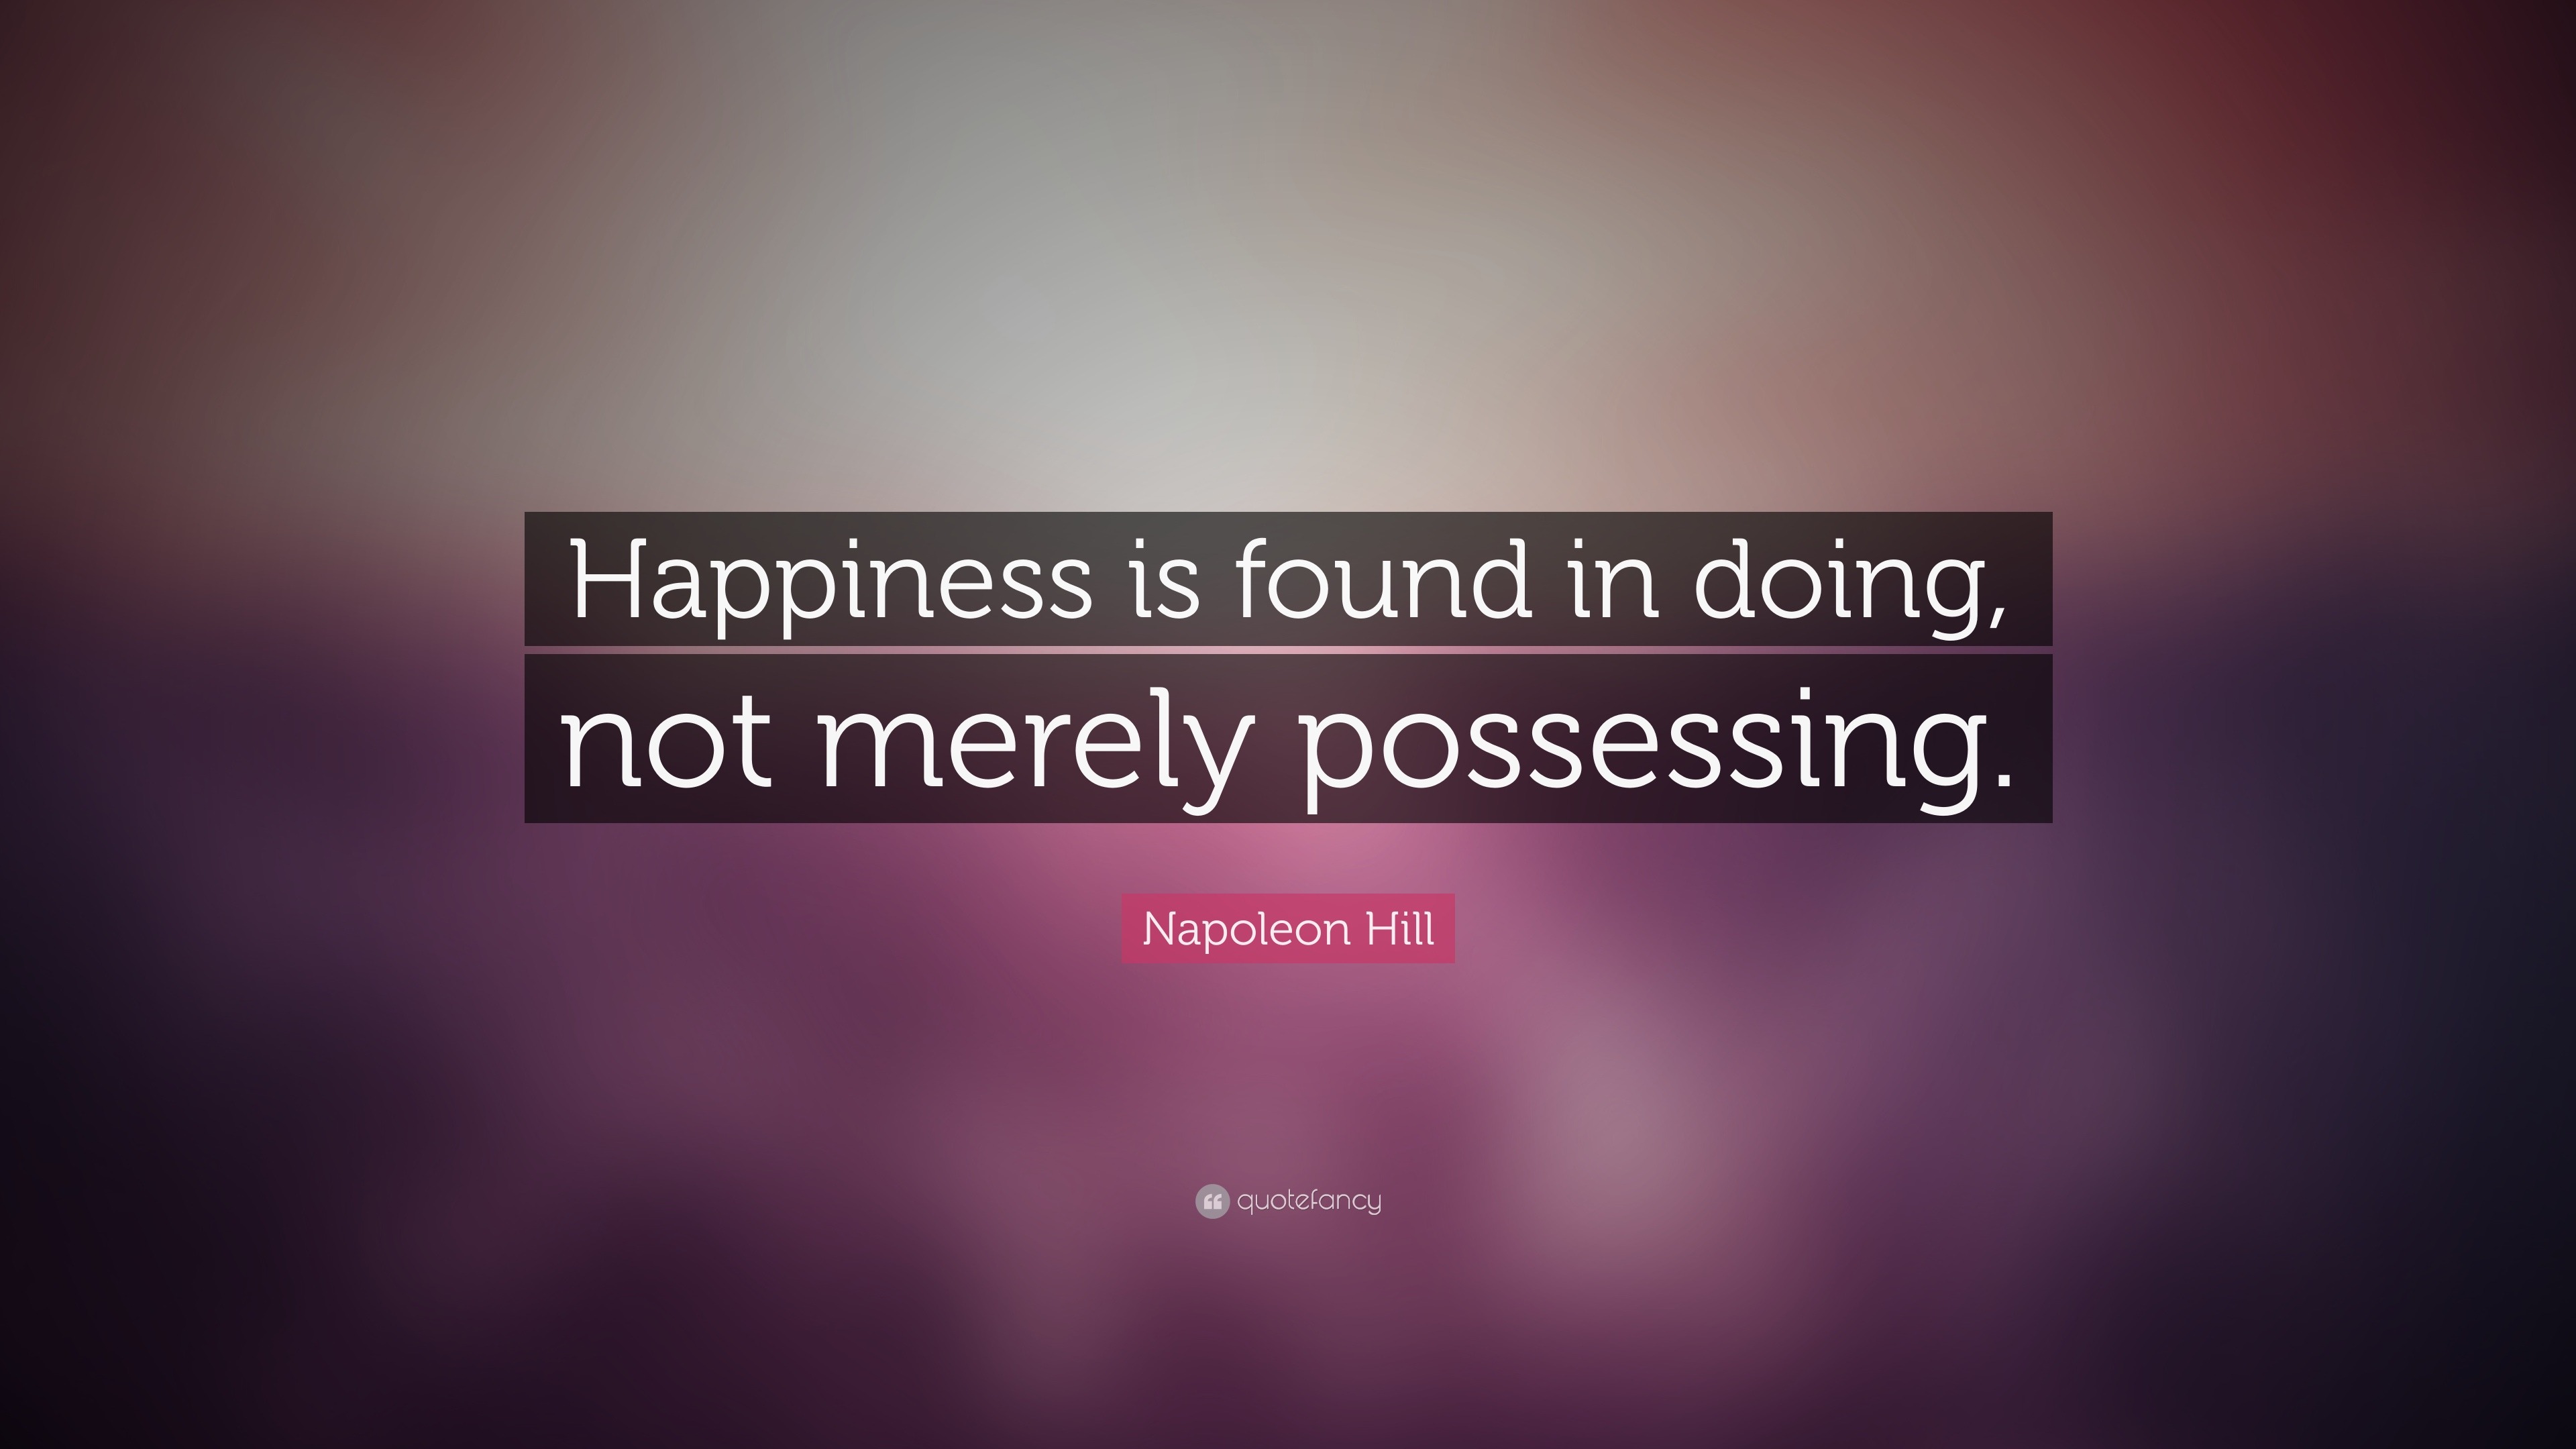 Napoleon Hill Quote: “Happiness is found in doing, not merely possessing. ”